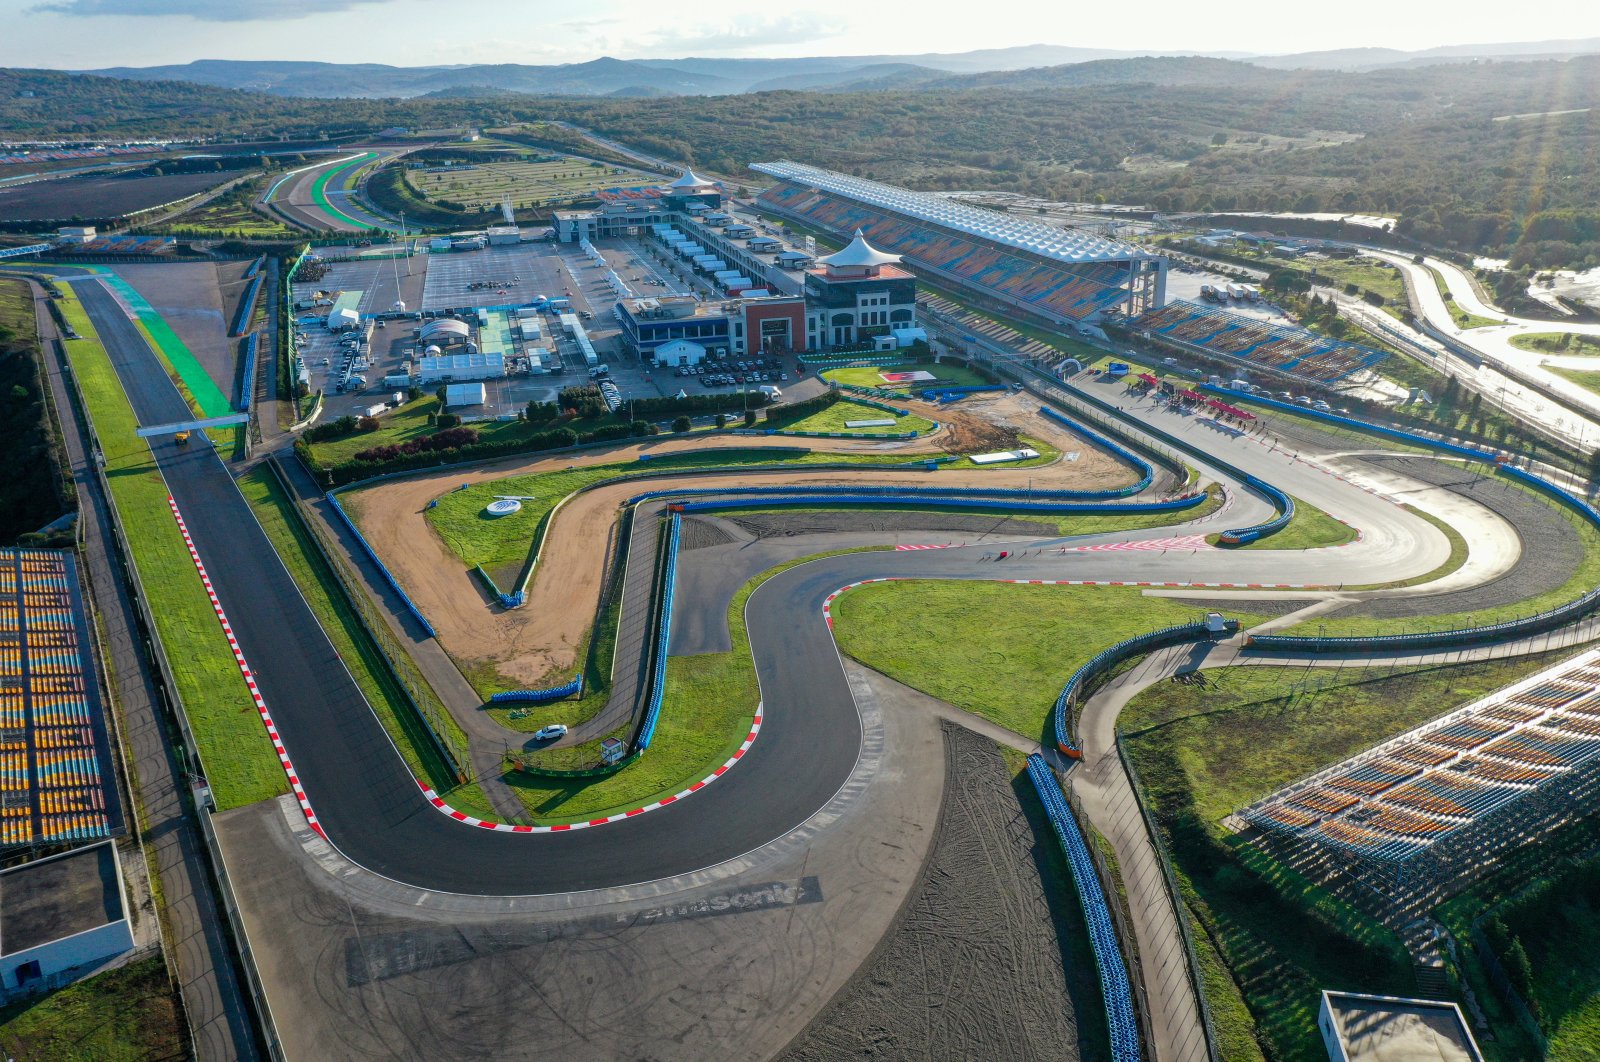 Intercity Istanbul Park, which will host the Formula One Turkish Grand Prix on Nov. 15, in Istanbul, Nov. 7, 2020. (AA Photo)